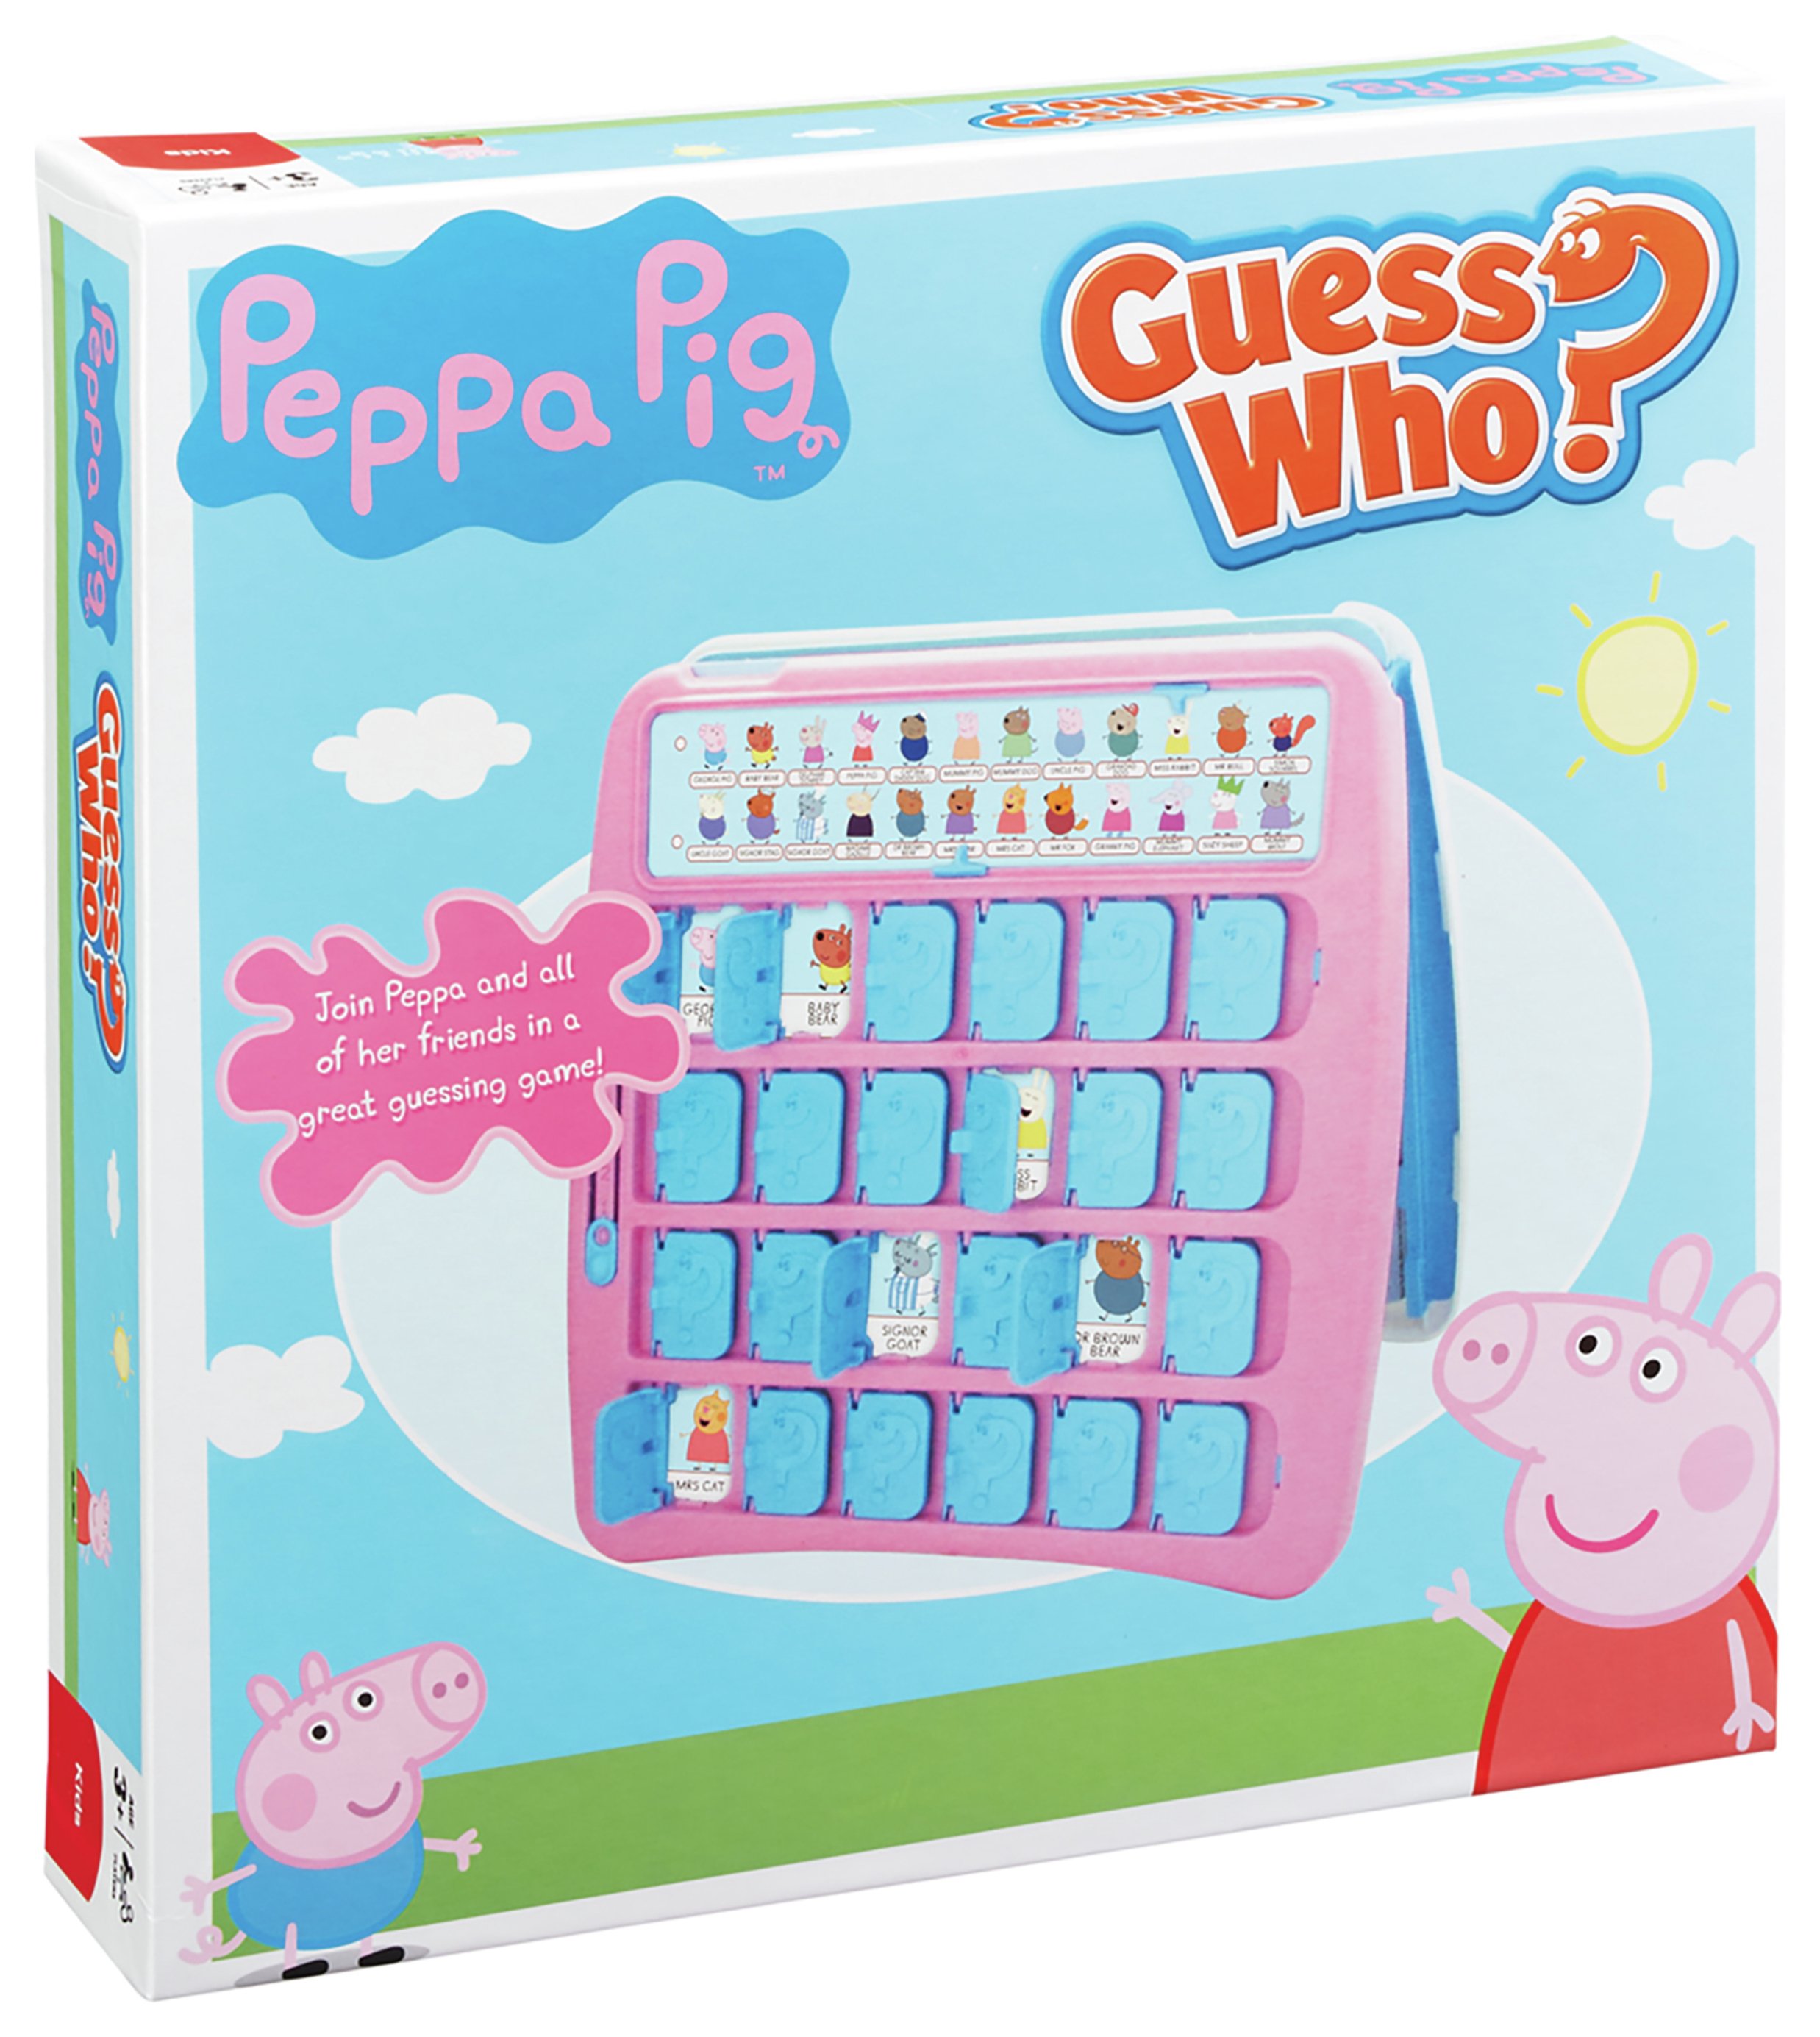 Peppa Pig Guess Who? Board Game